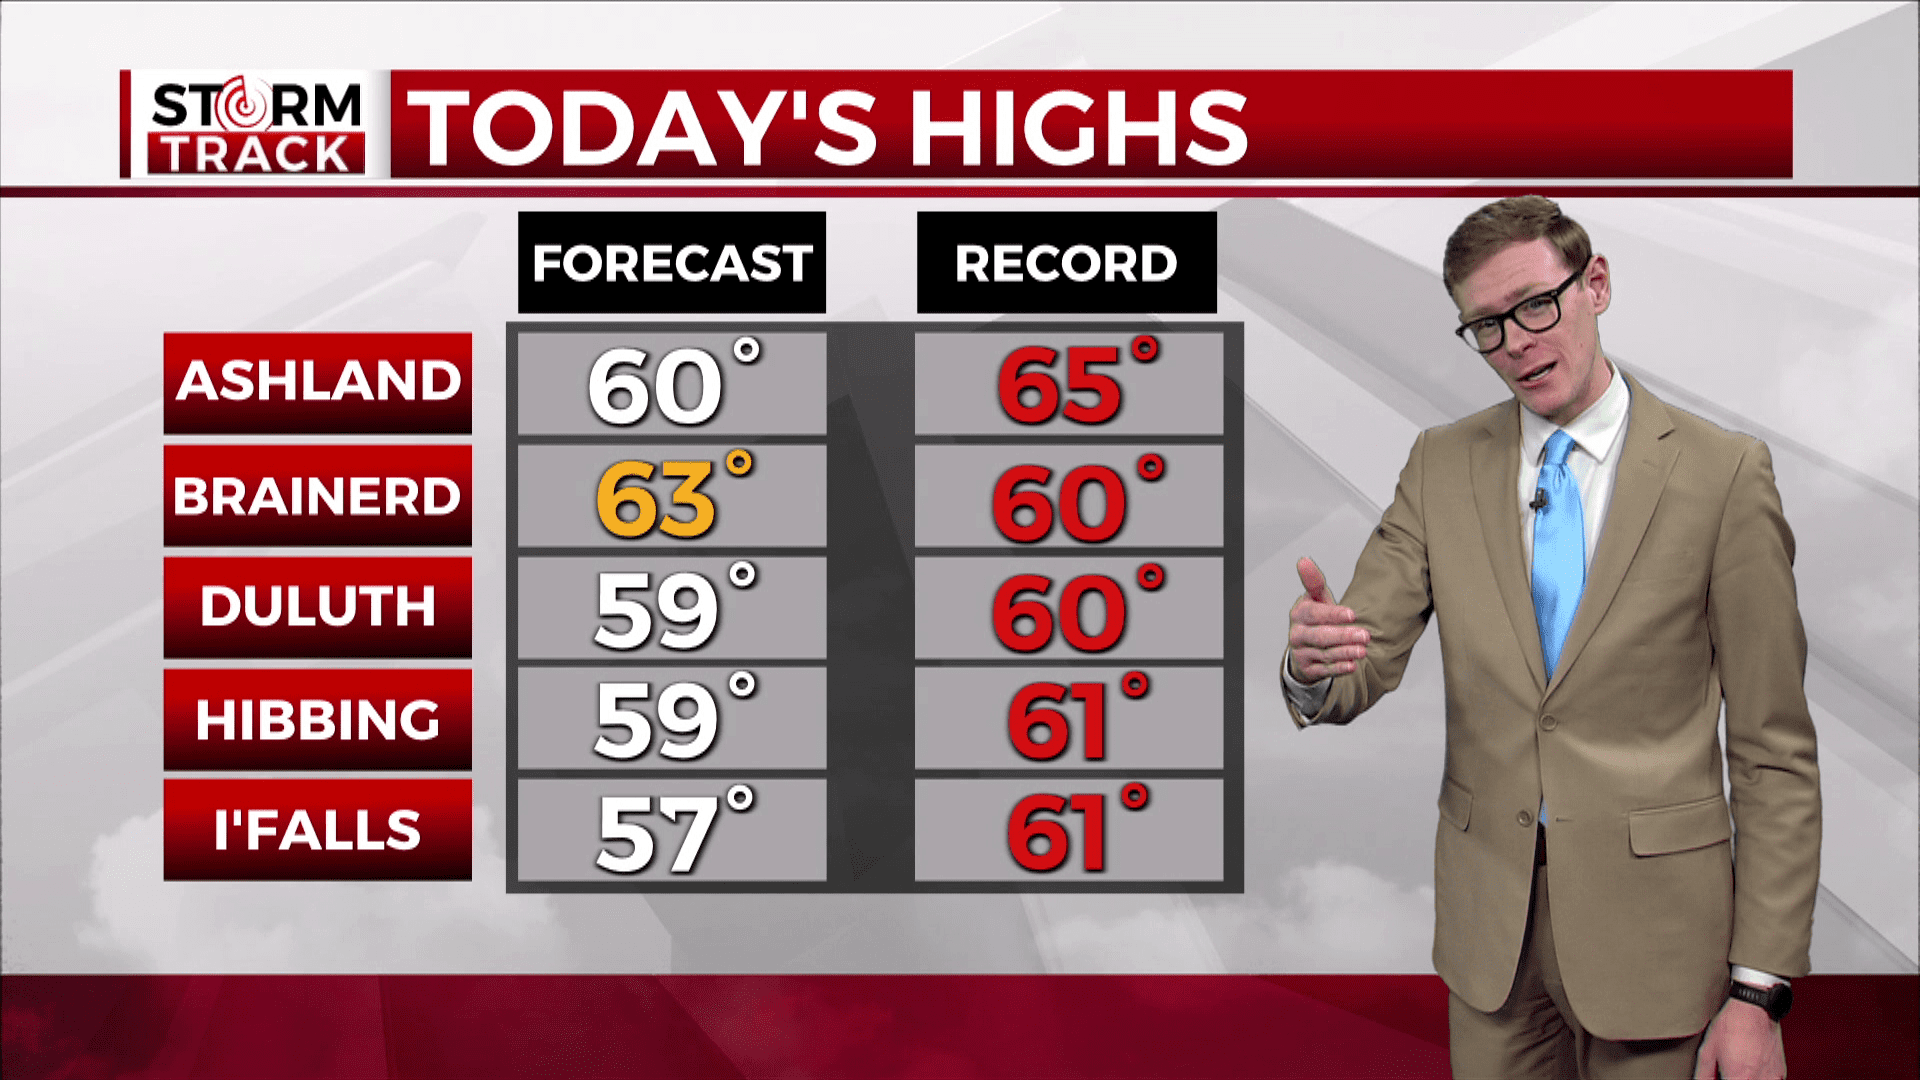 Brandon showing Monday's forecast compared to records